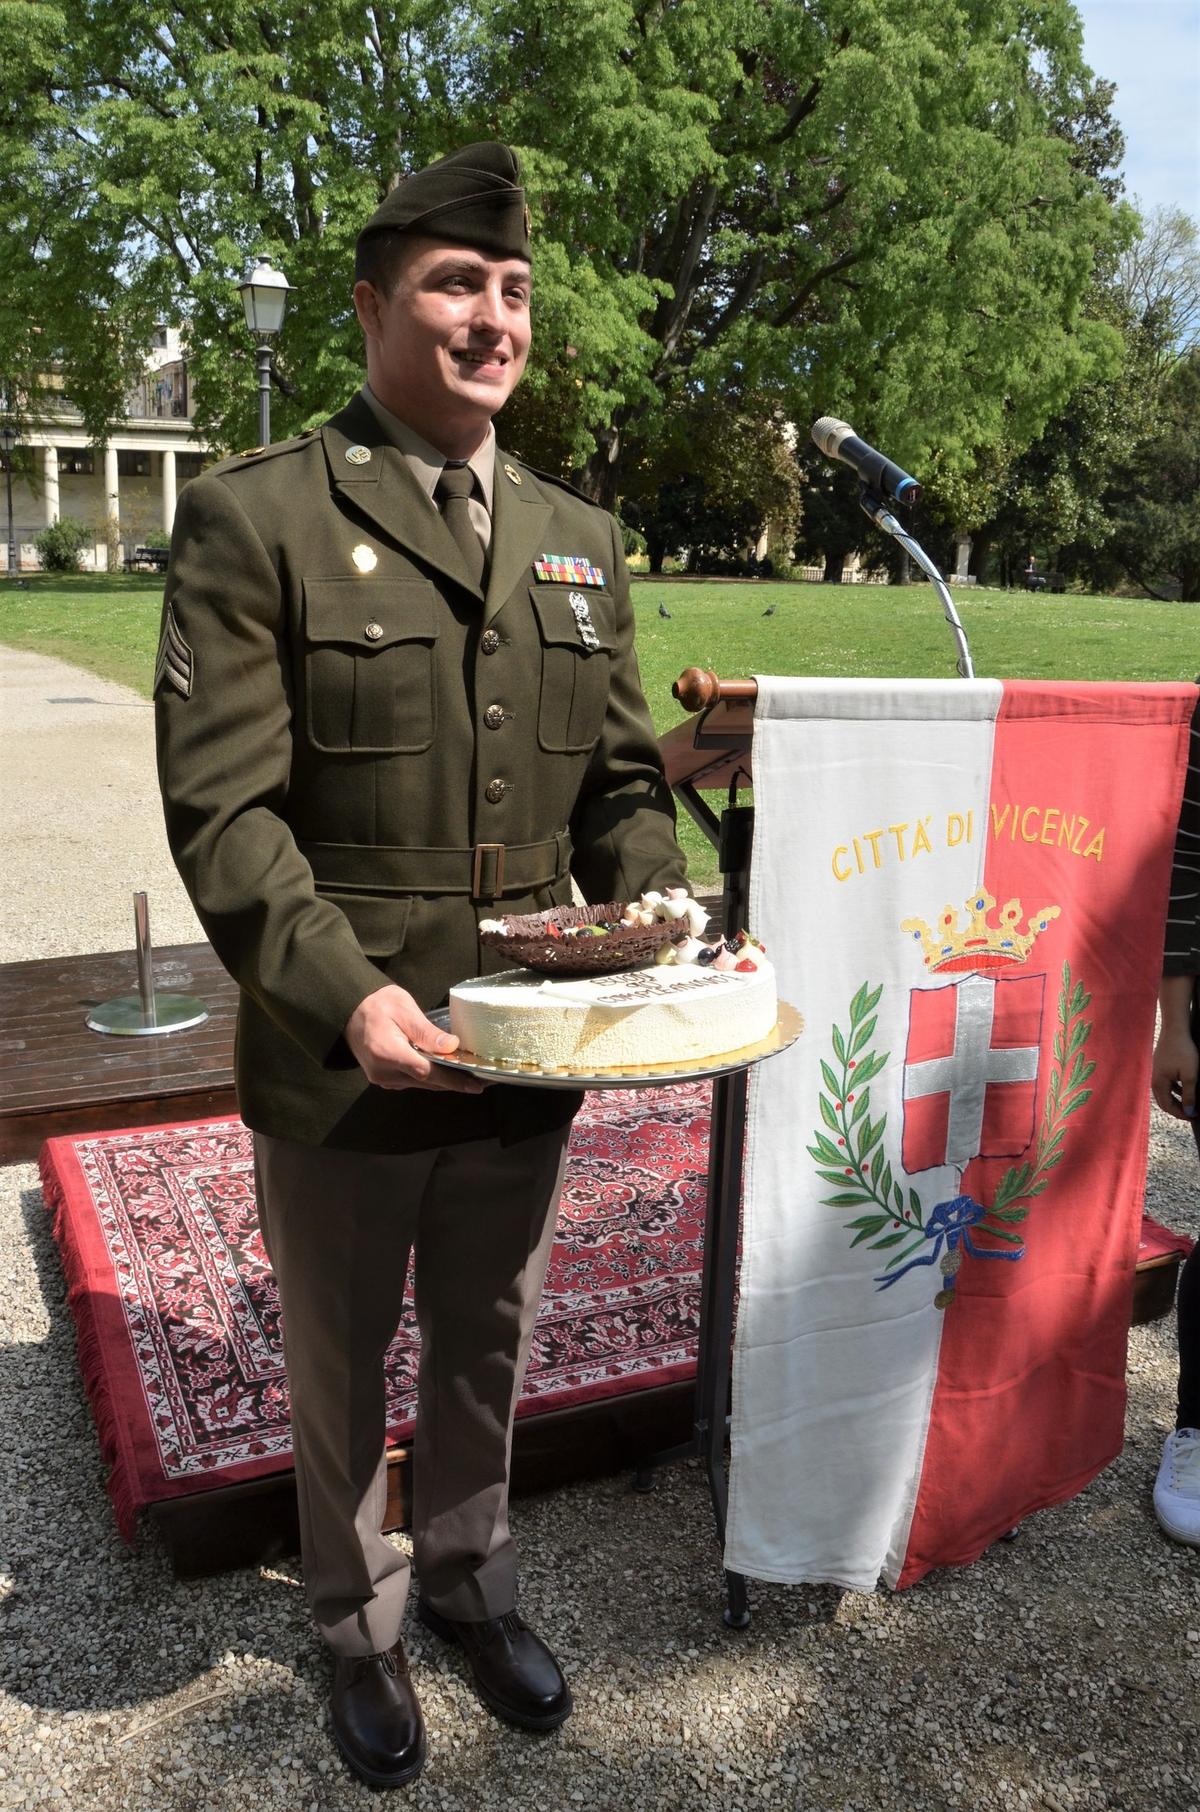 Soldiers from U.S. Army Garrison Italy returned a birthday cake to Meri Mion, in Vicenza, Italy, on April 28, 2022. (Courtesy of Laura Kreider/<a href="https://www.dvidshub.net/image/7165392/soldiers-us-army-garrison-italy-return-birthday-cake-after-77-years">U.S. Army Garrison Italy</a>)